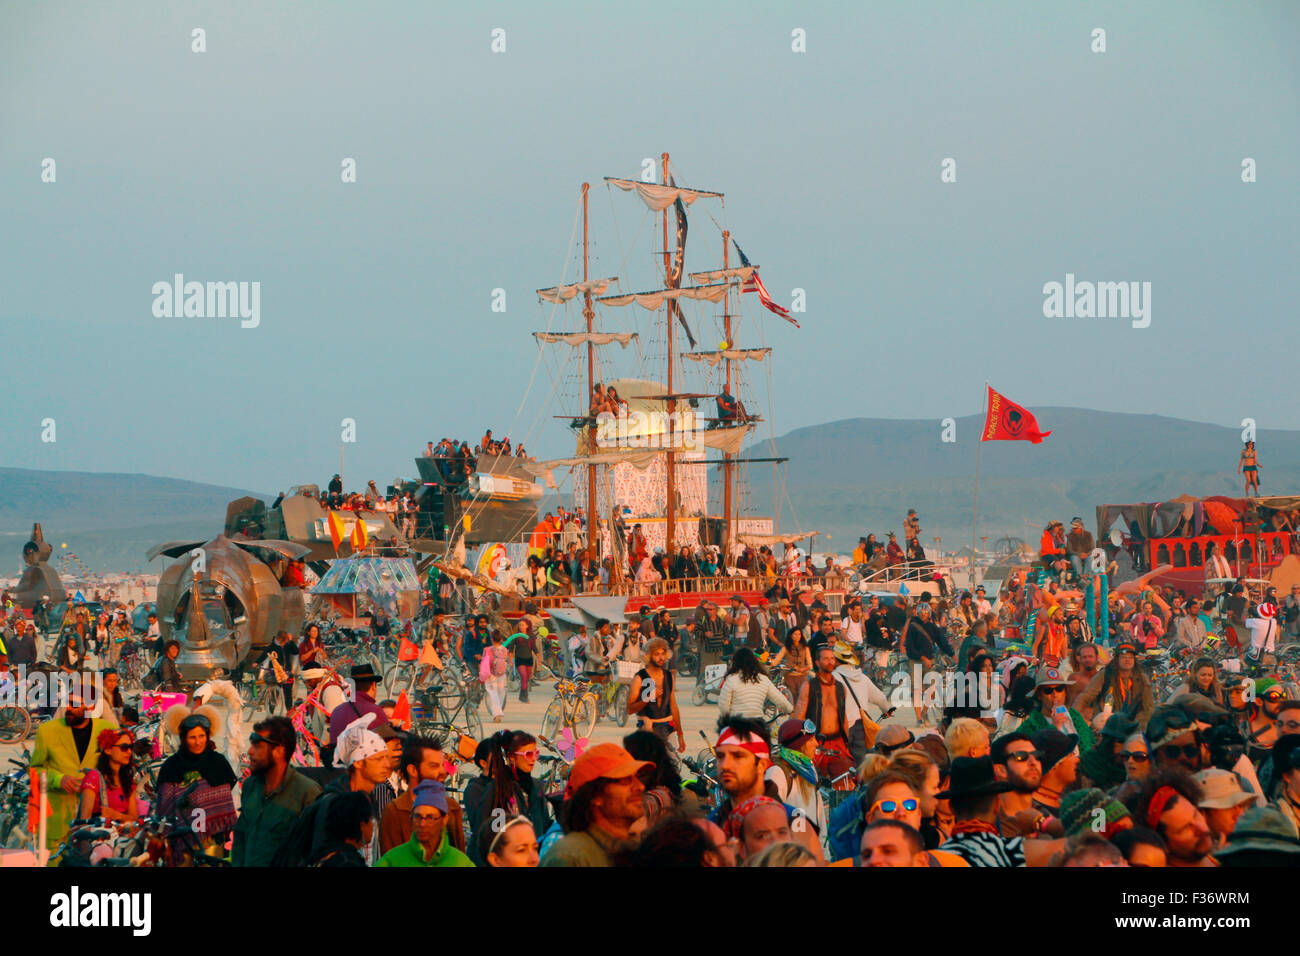 Burners gather for the sunset in the playa during the annual Burning Man festival in the desert August 26, 2014 in Black Rock City, Nevada. Stock Photo